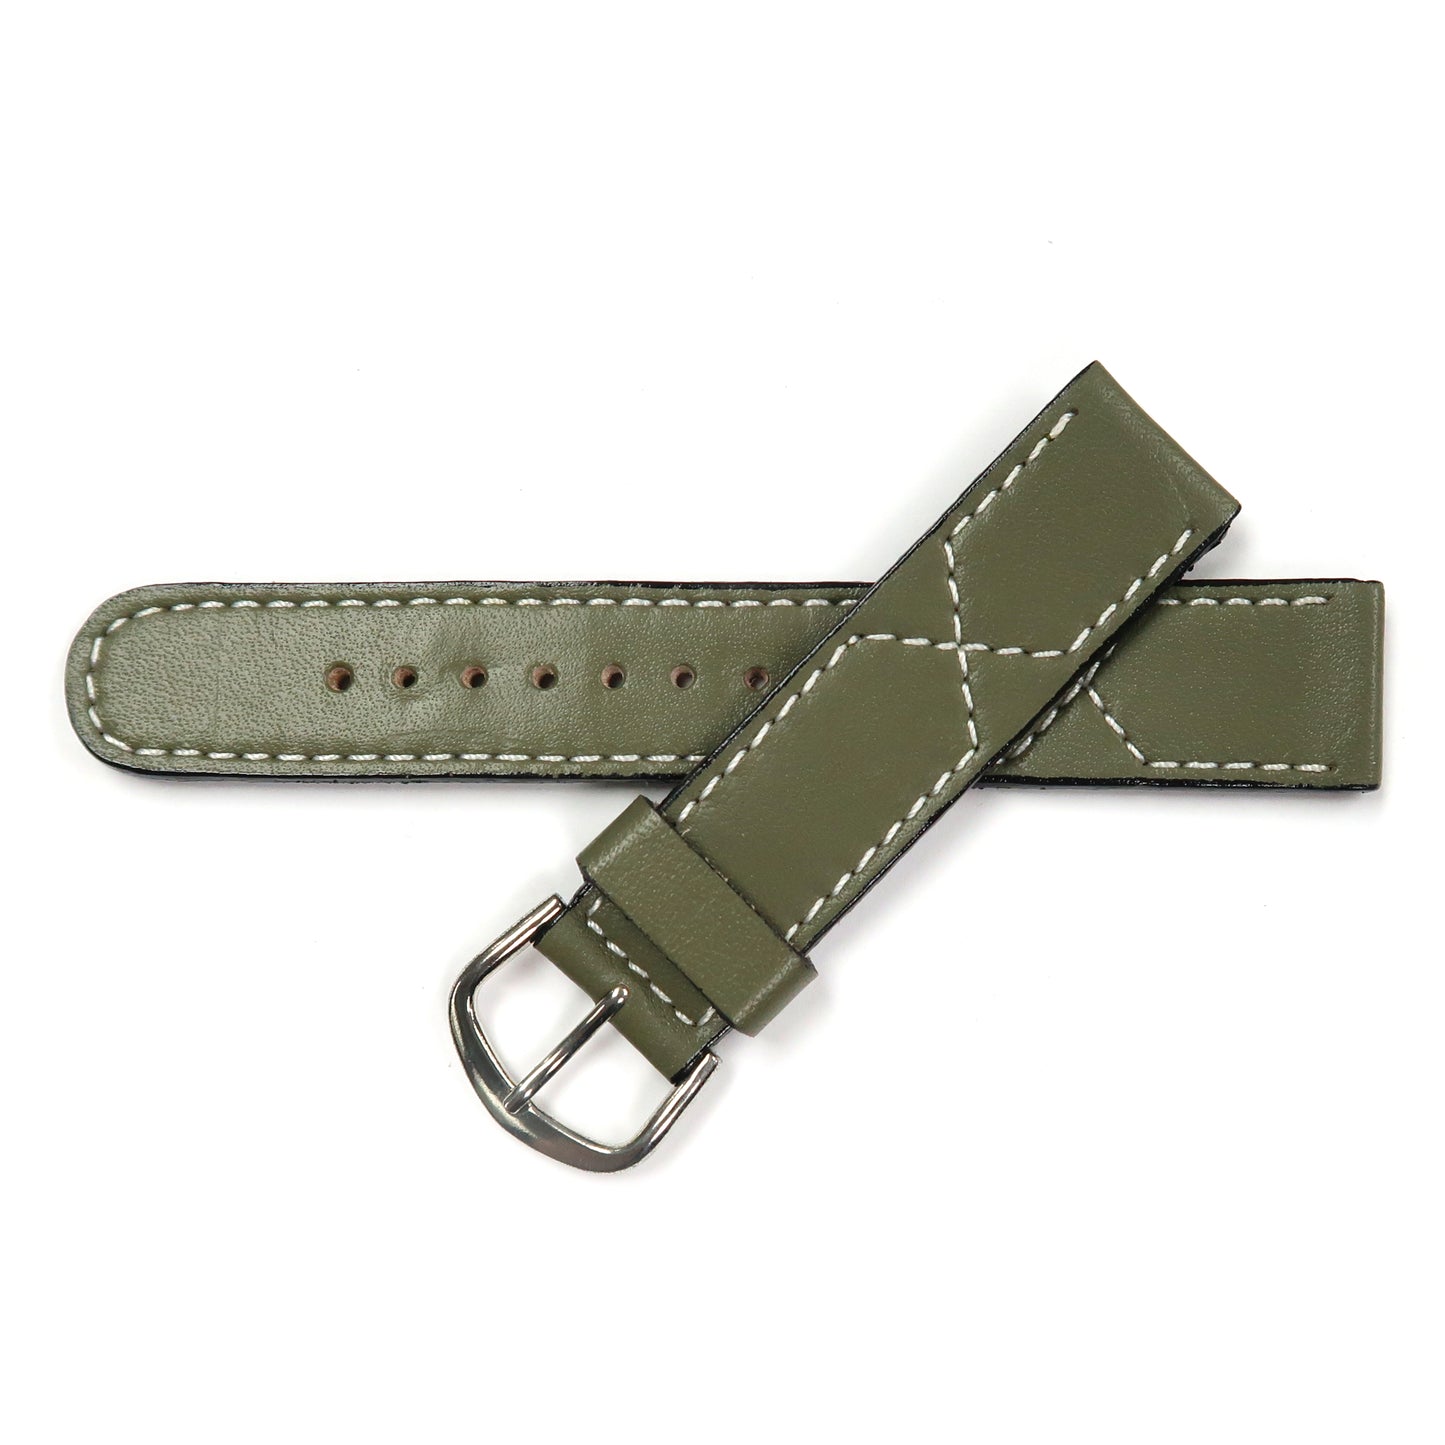 Genuine Leather Watch Band 18mm Plain Grain Stitched Band in Green - Universal Jewelers & Watch Tools Inc. 